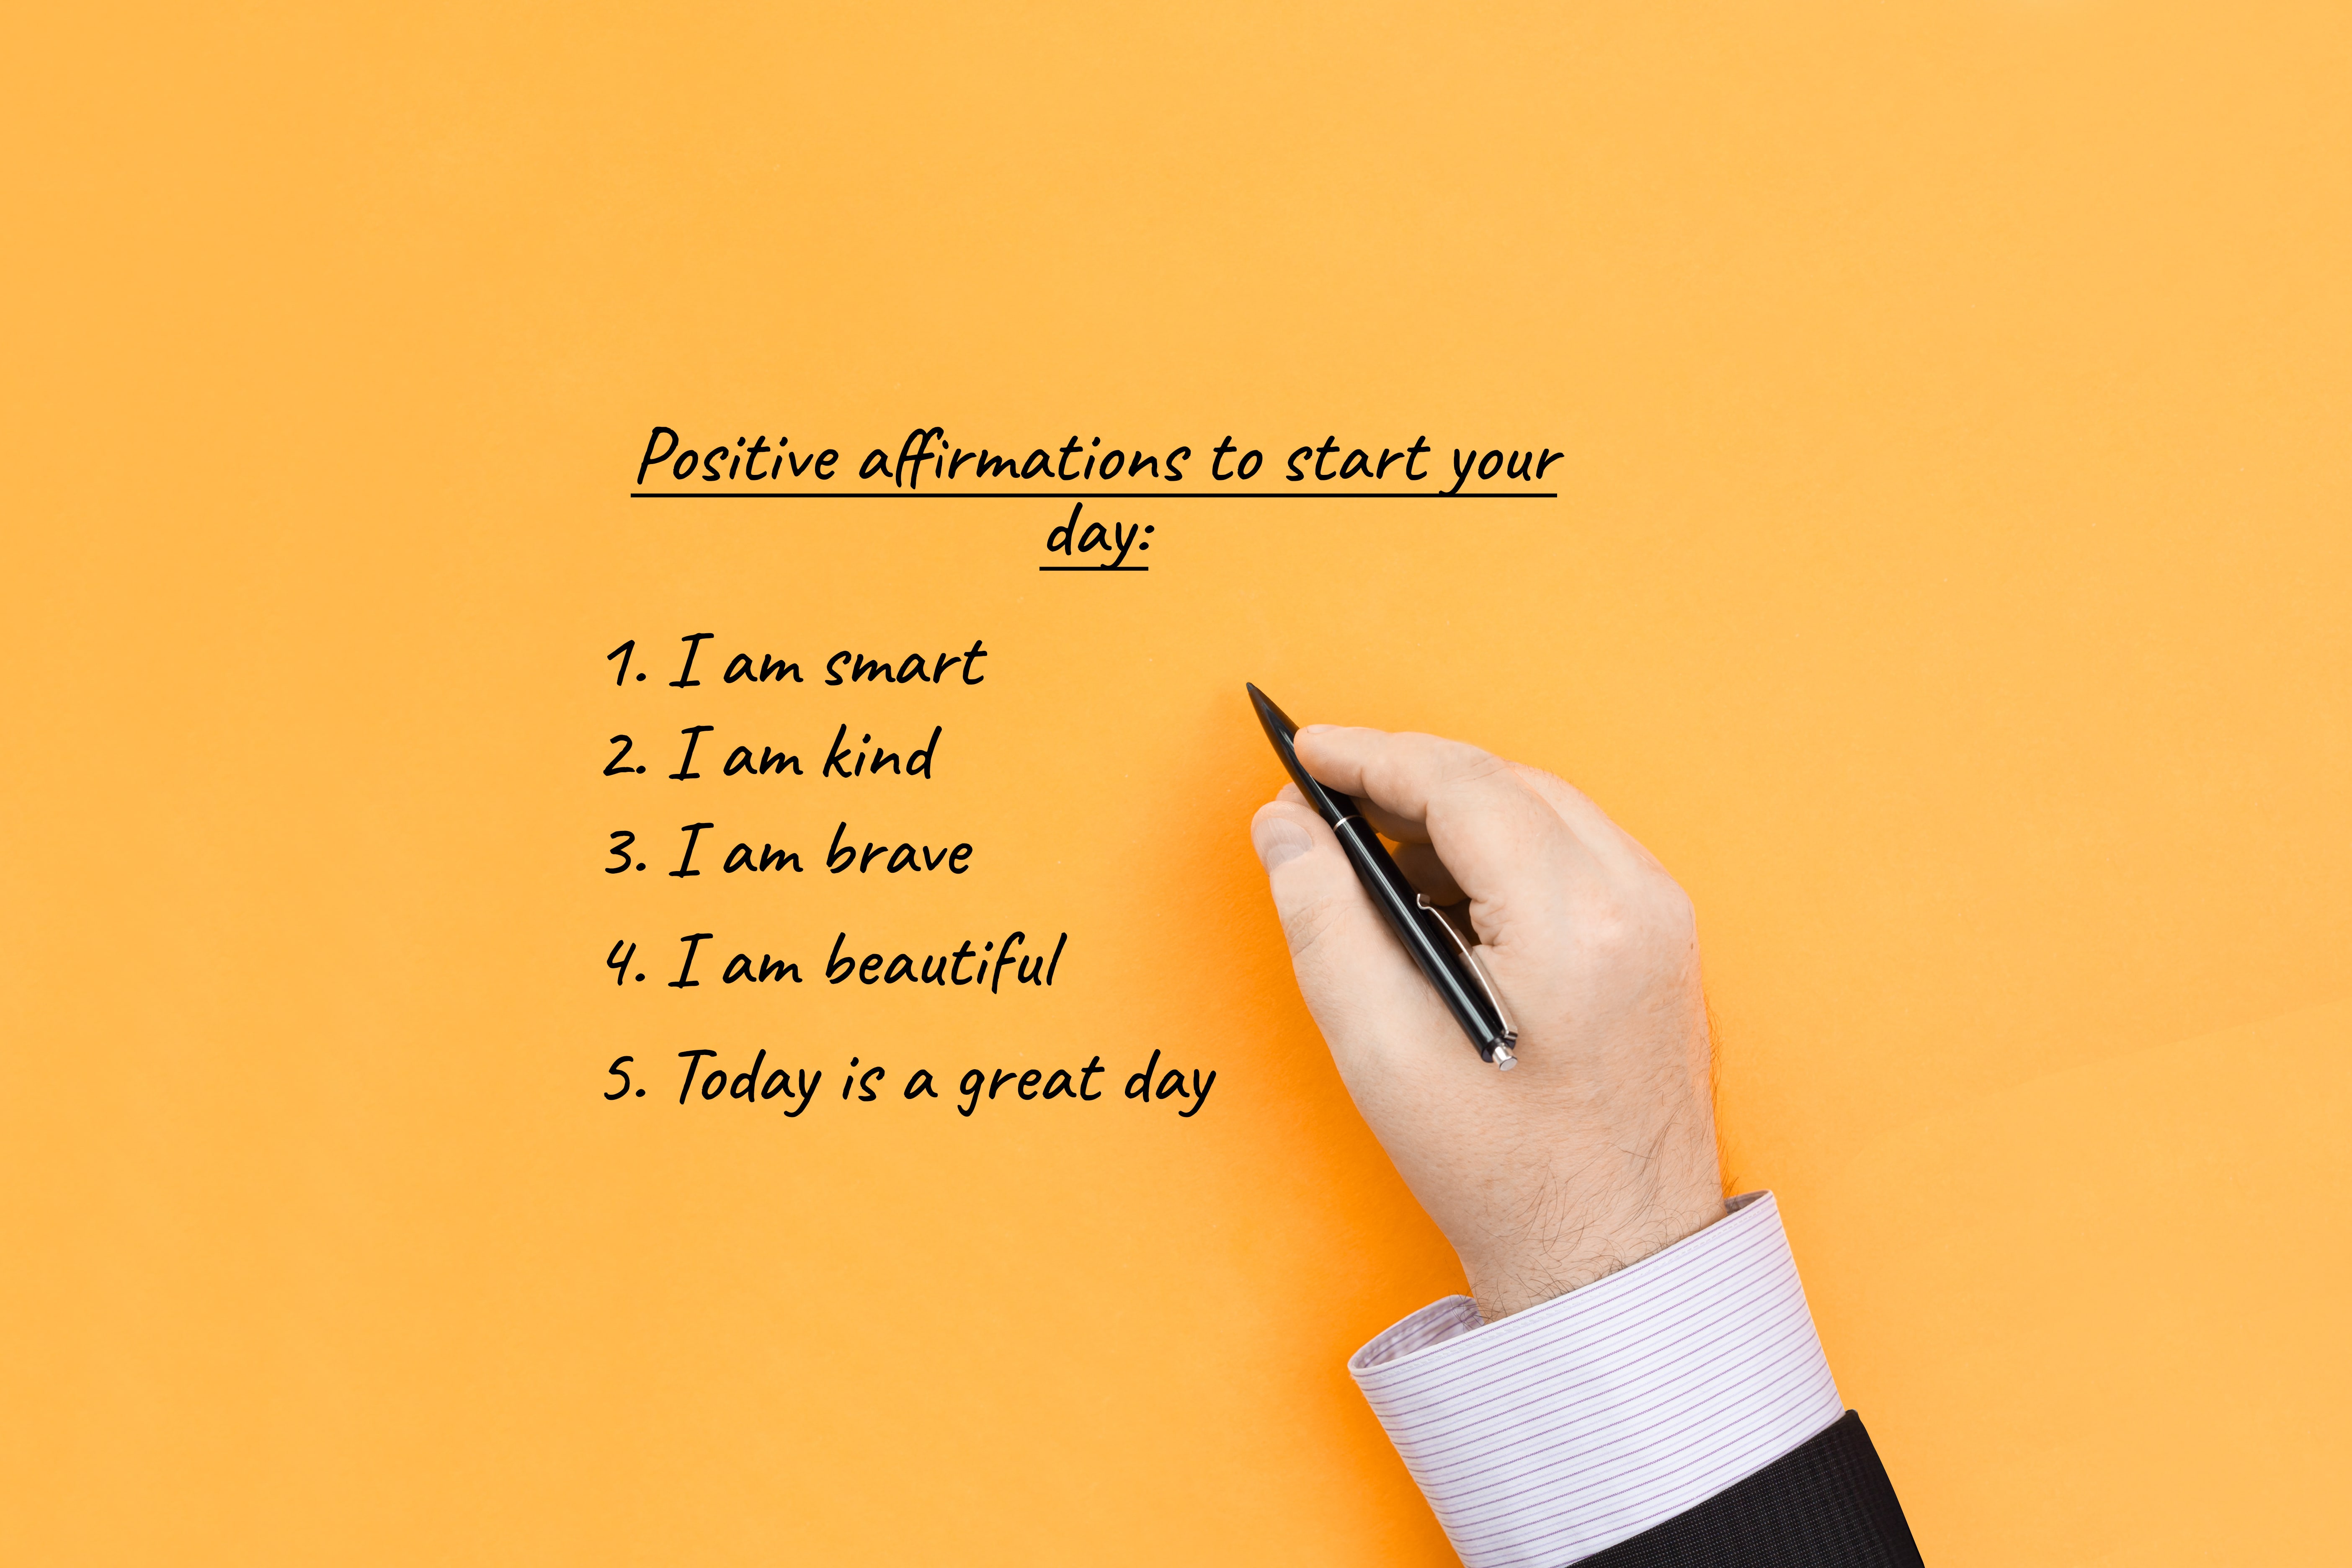 A hand holding a pen writing a list of positive affirmations to start your day.